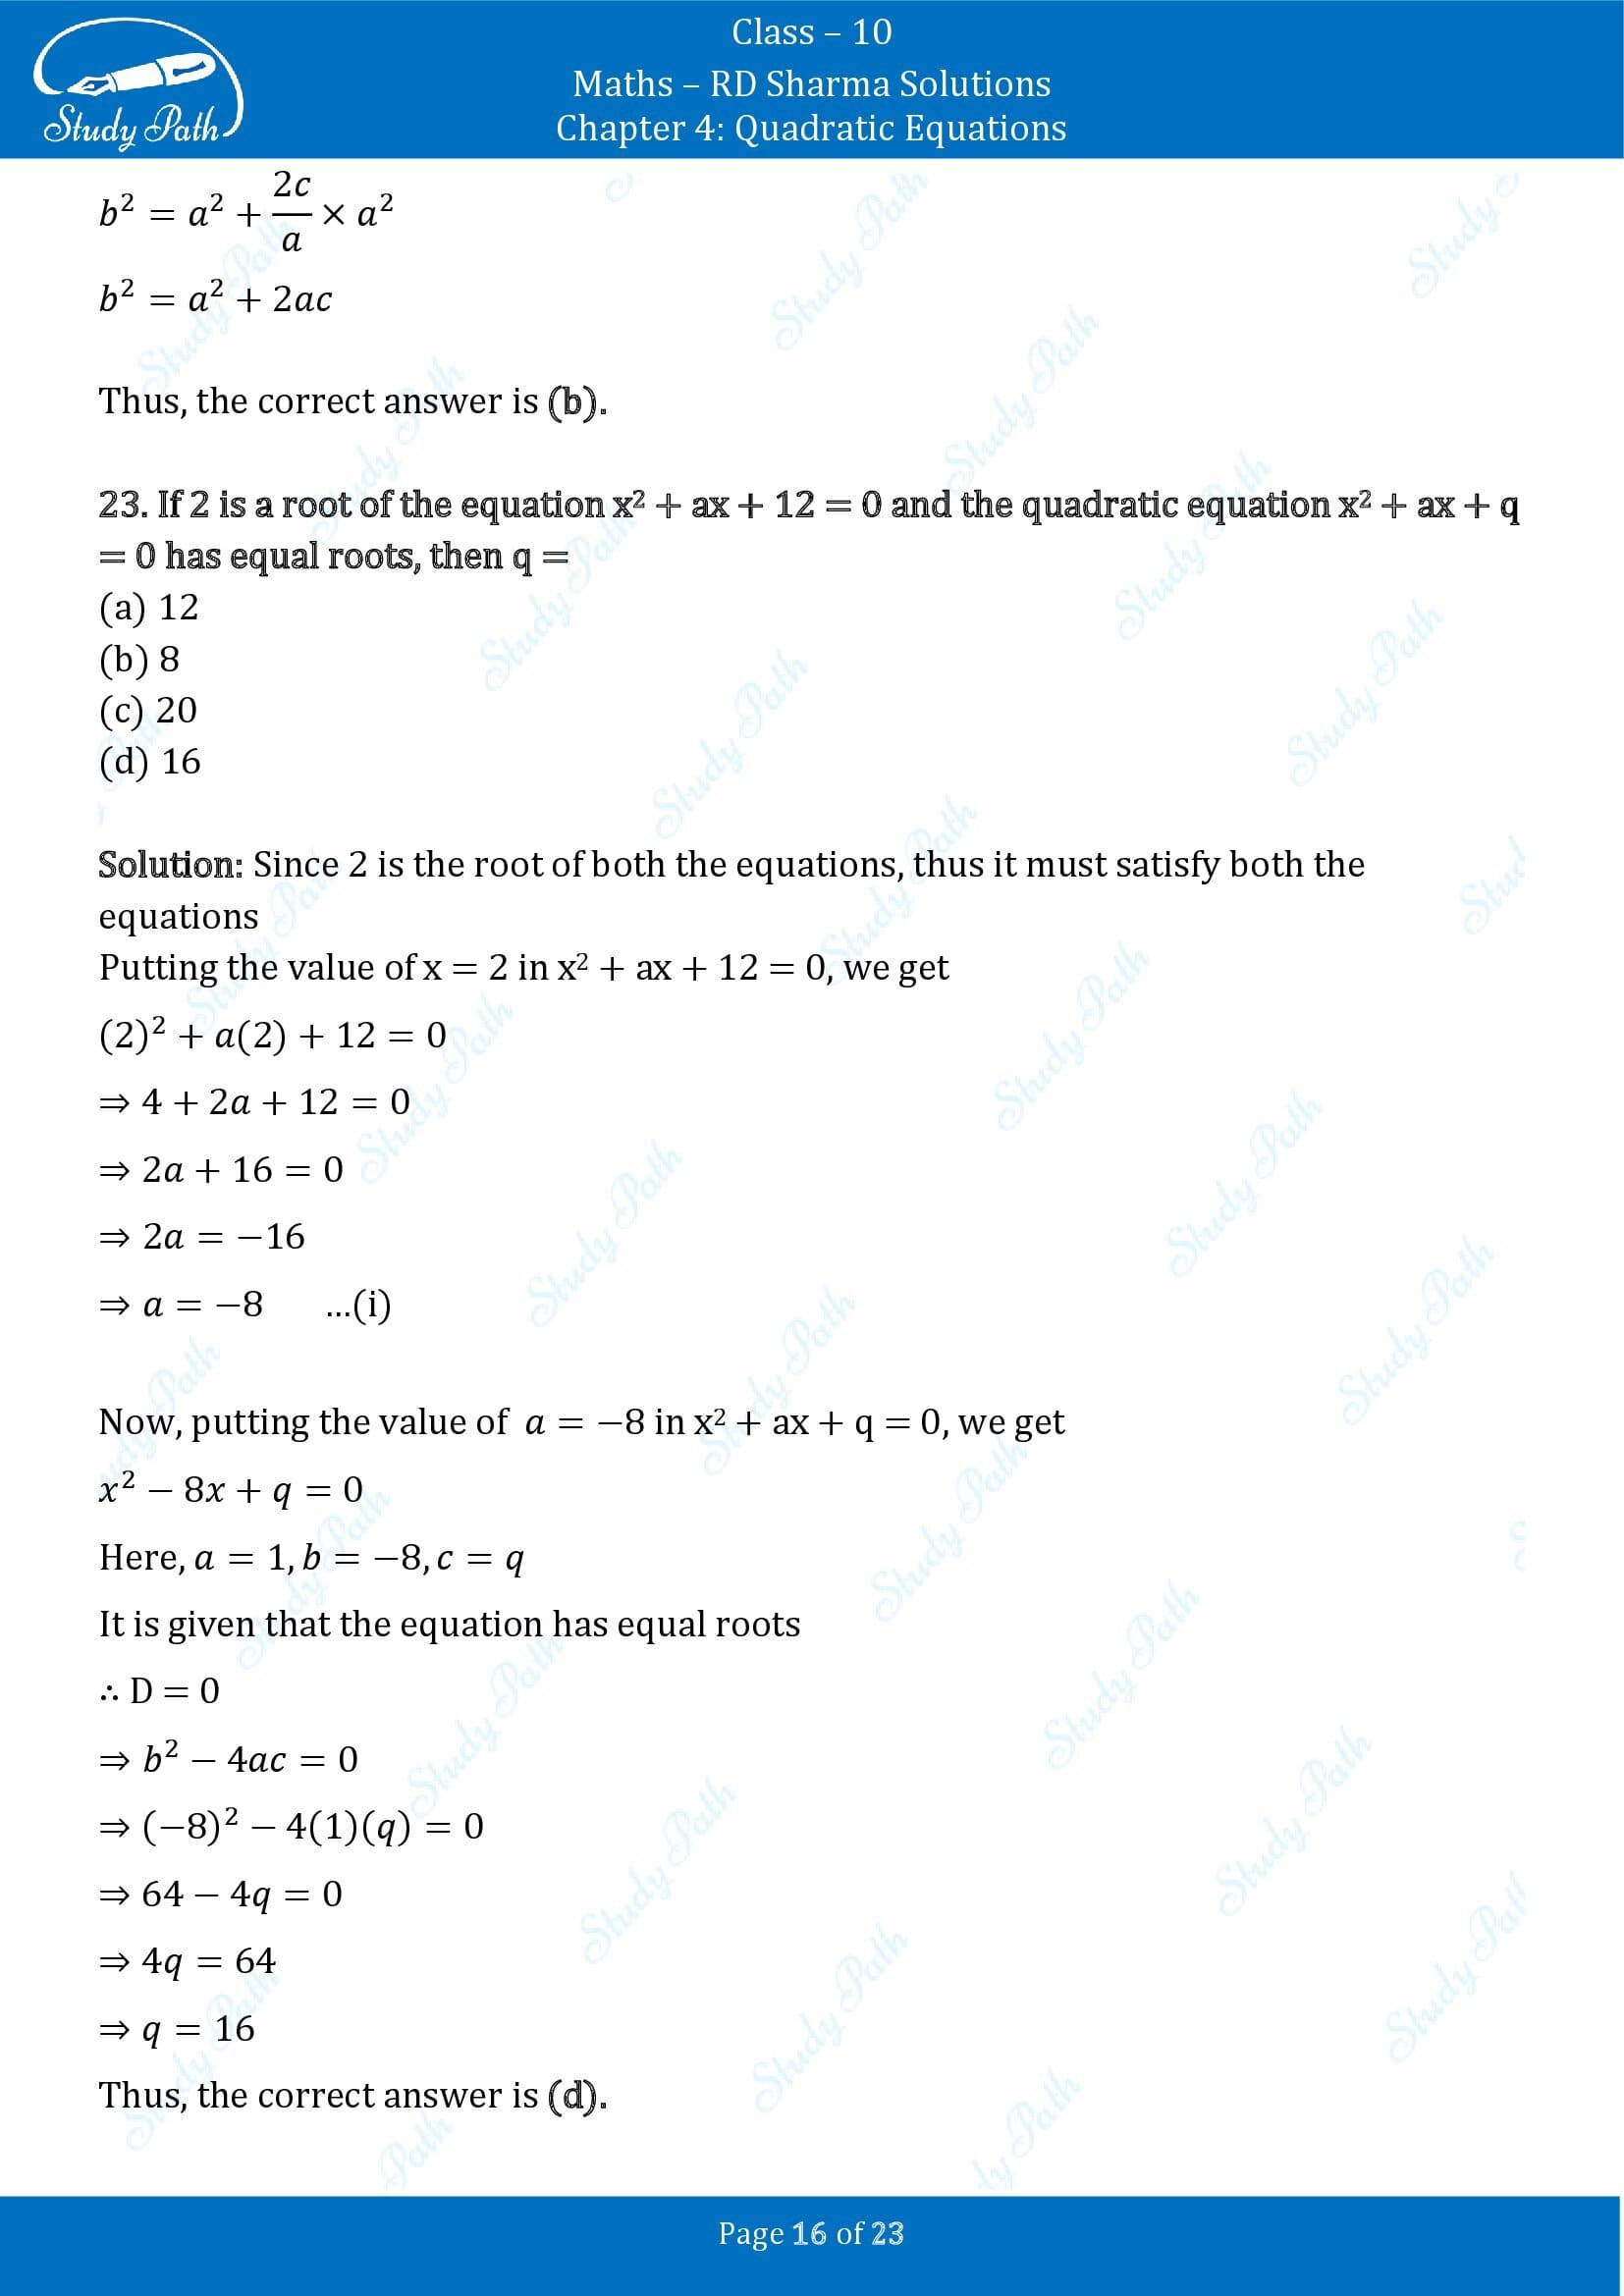 RD Sharma Solutions Class 10 Chapter 4 Quadratic Equations Multiple Choice Questions MCQs 00016